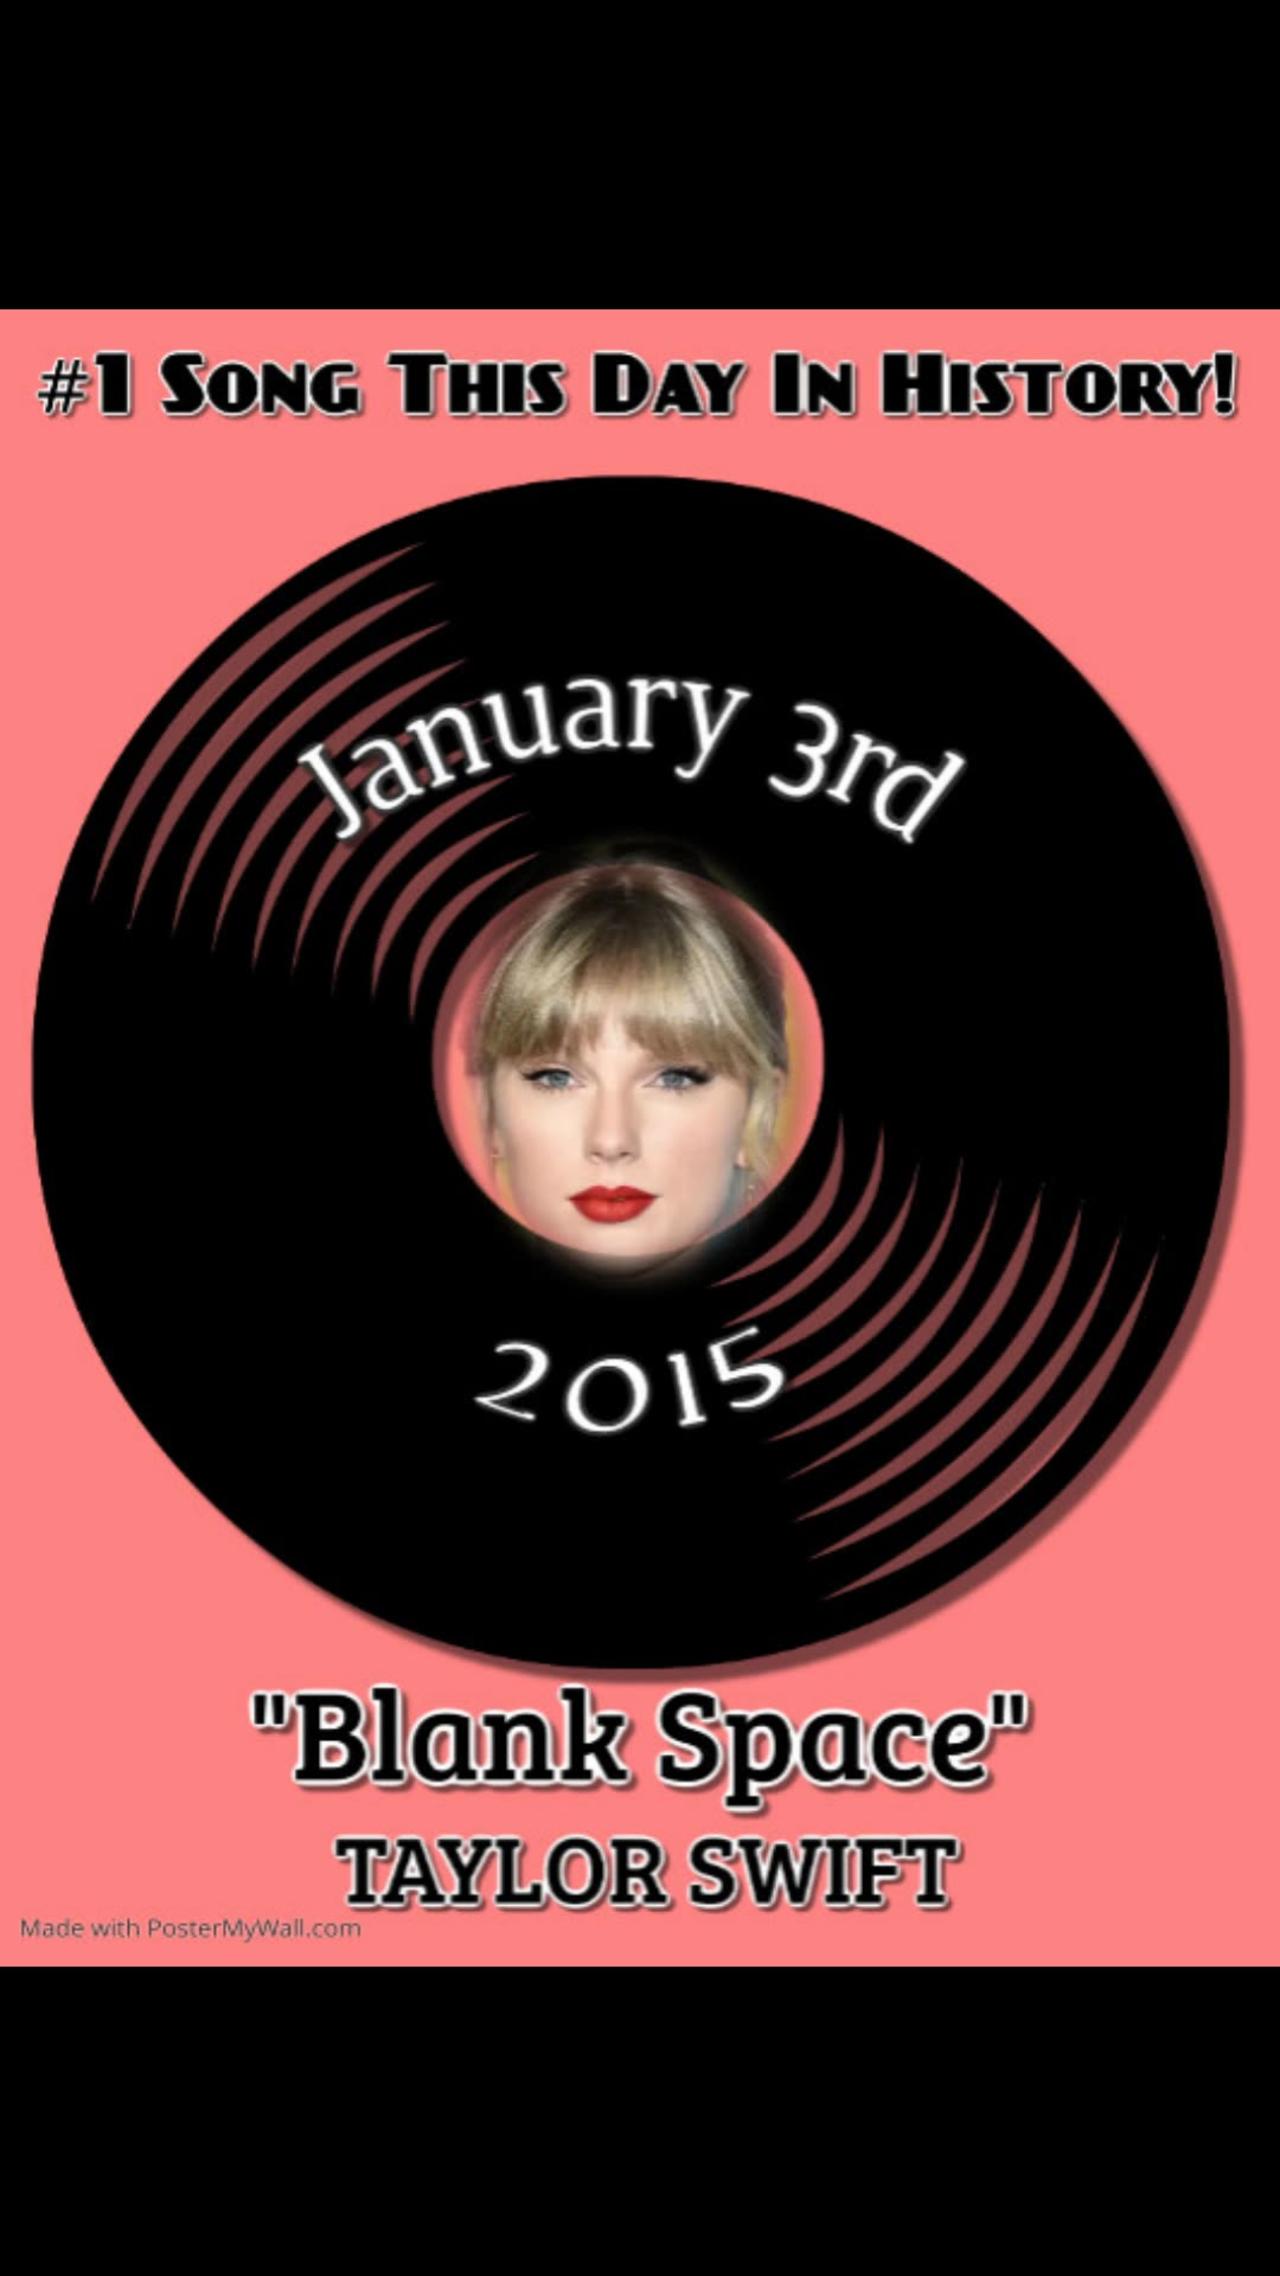 “BLANK SPACE” by TAYLOR SWIFT